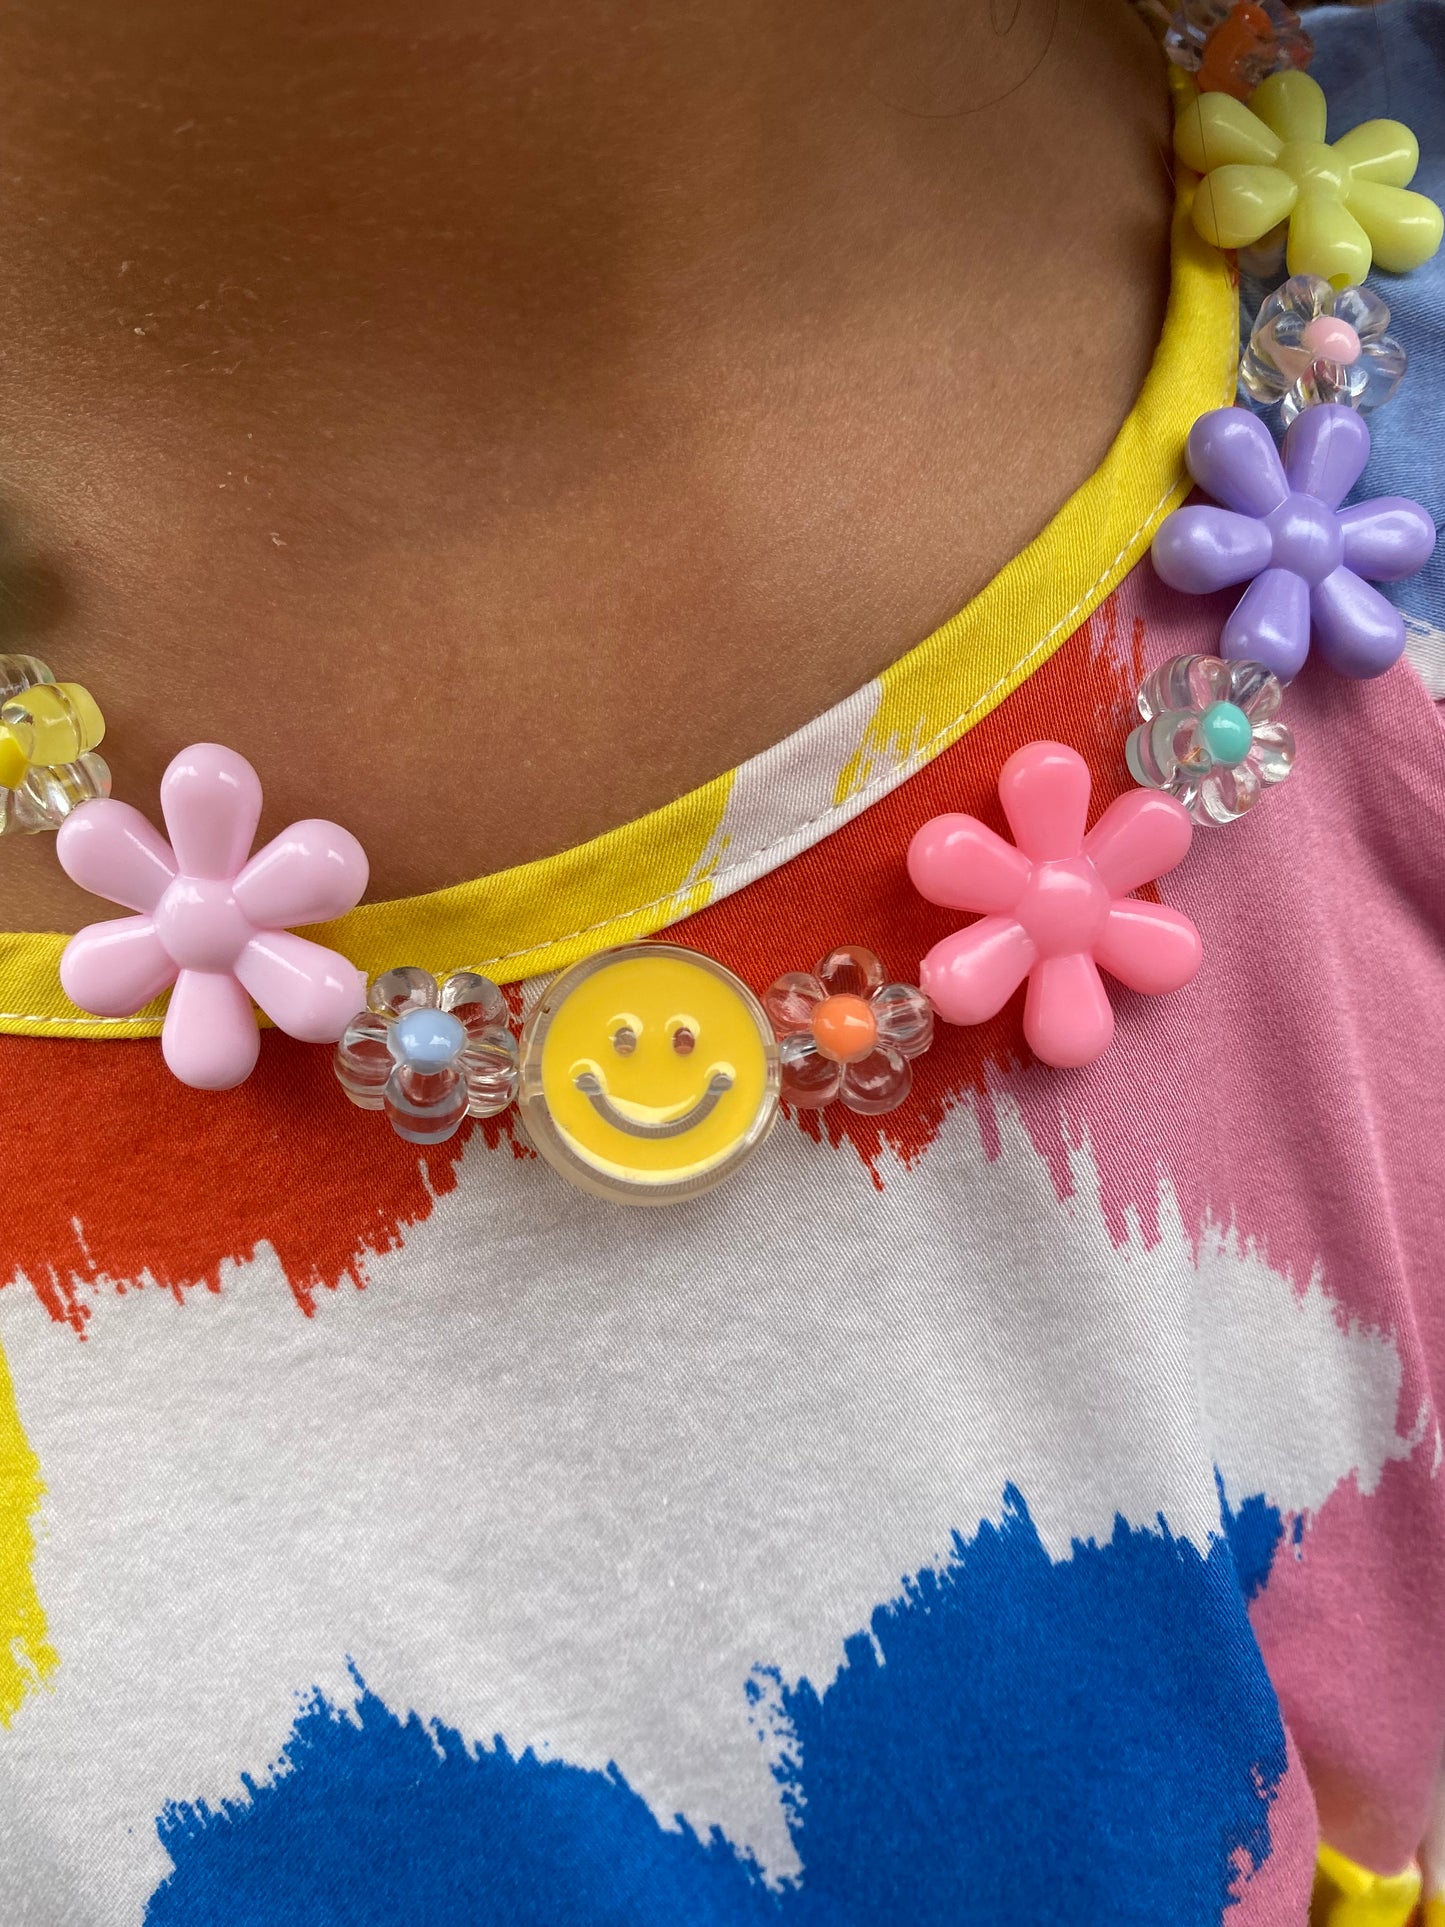 SMILEY FLOWER CHOKER NECKLACE